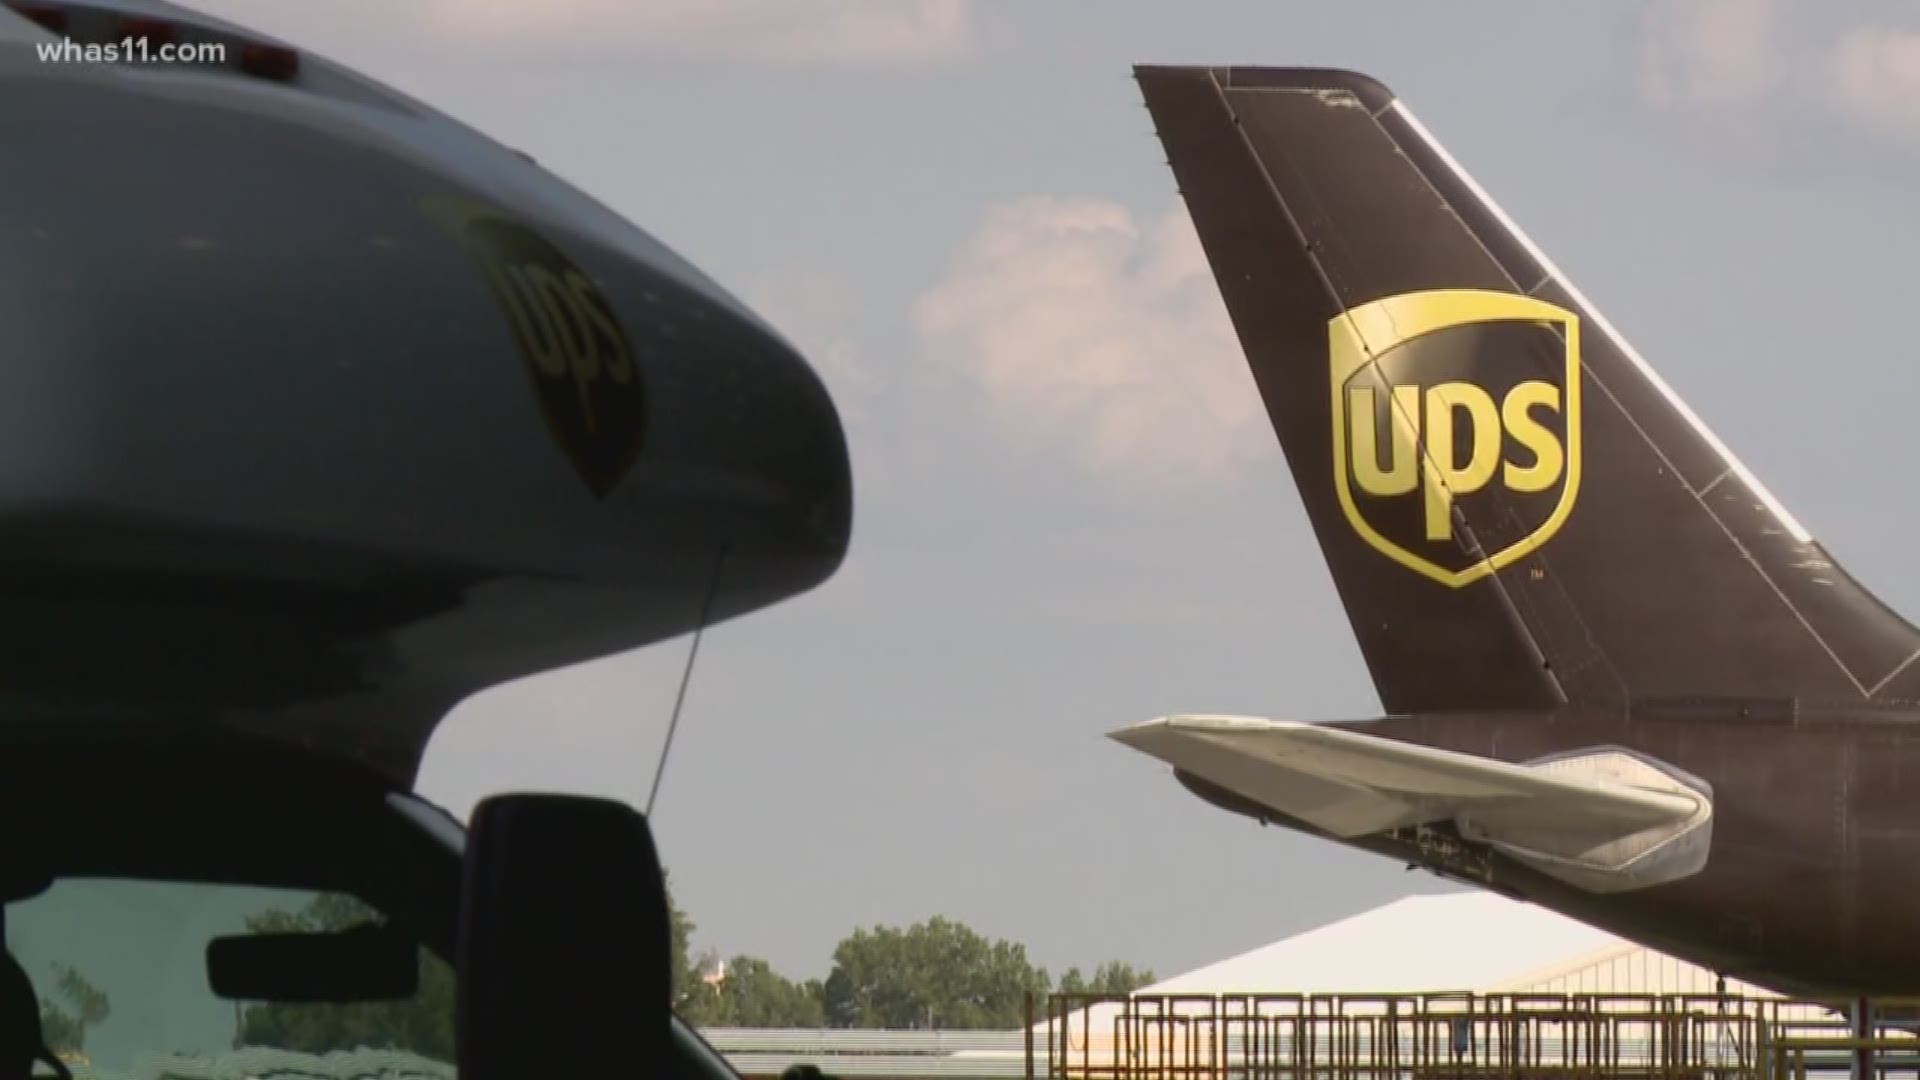 UPS will invest $750 million into the worldport and will create over 1,000 jobs in Louisville.